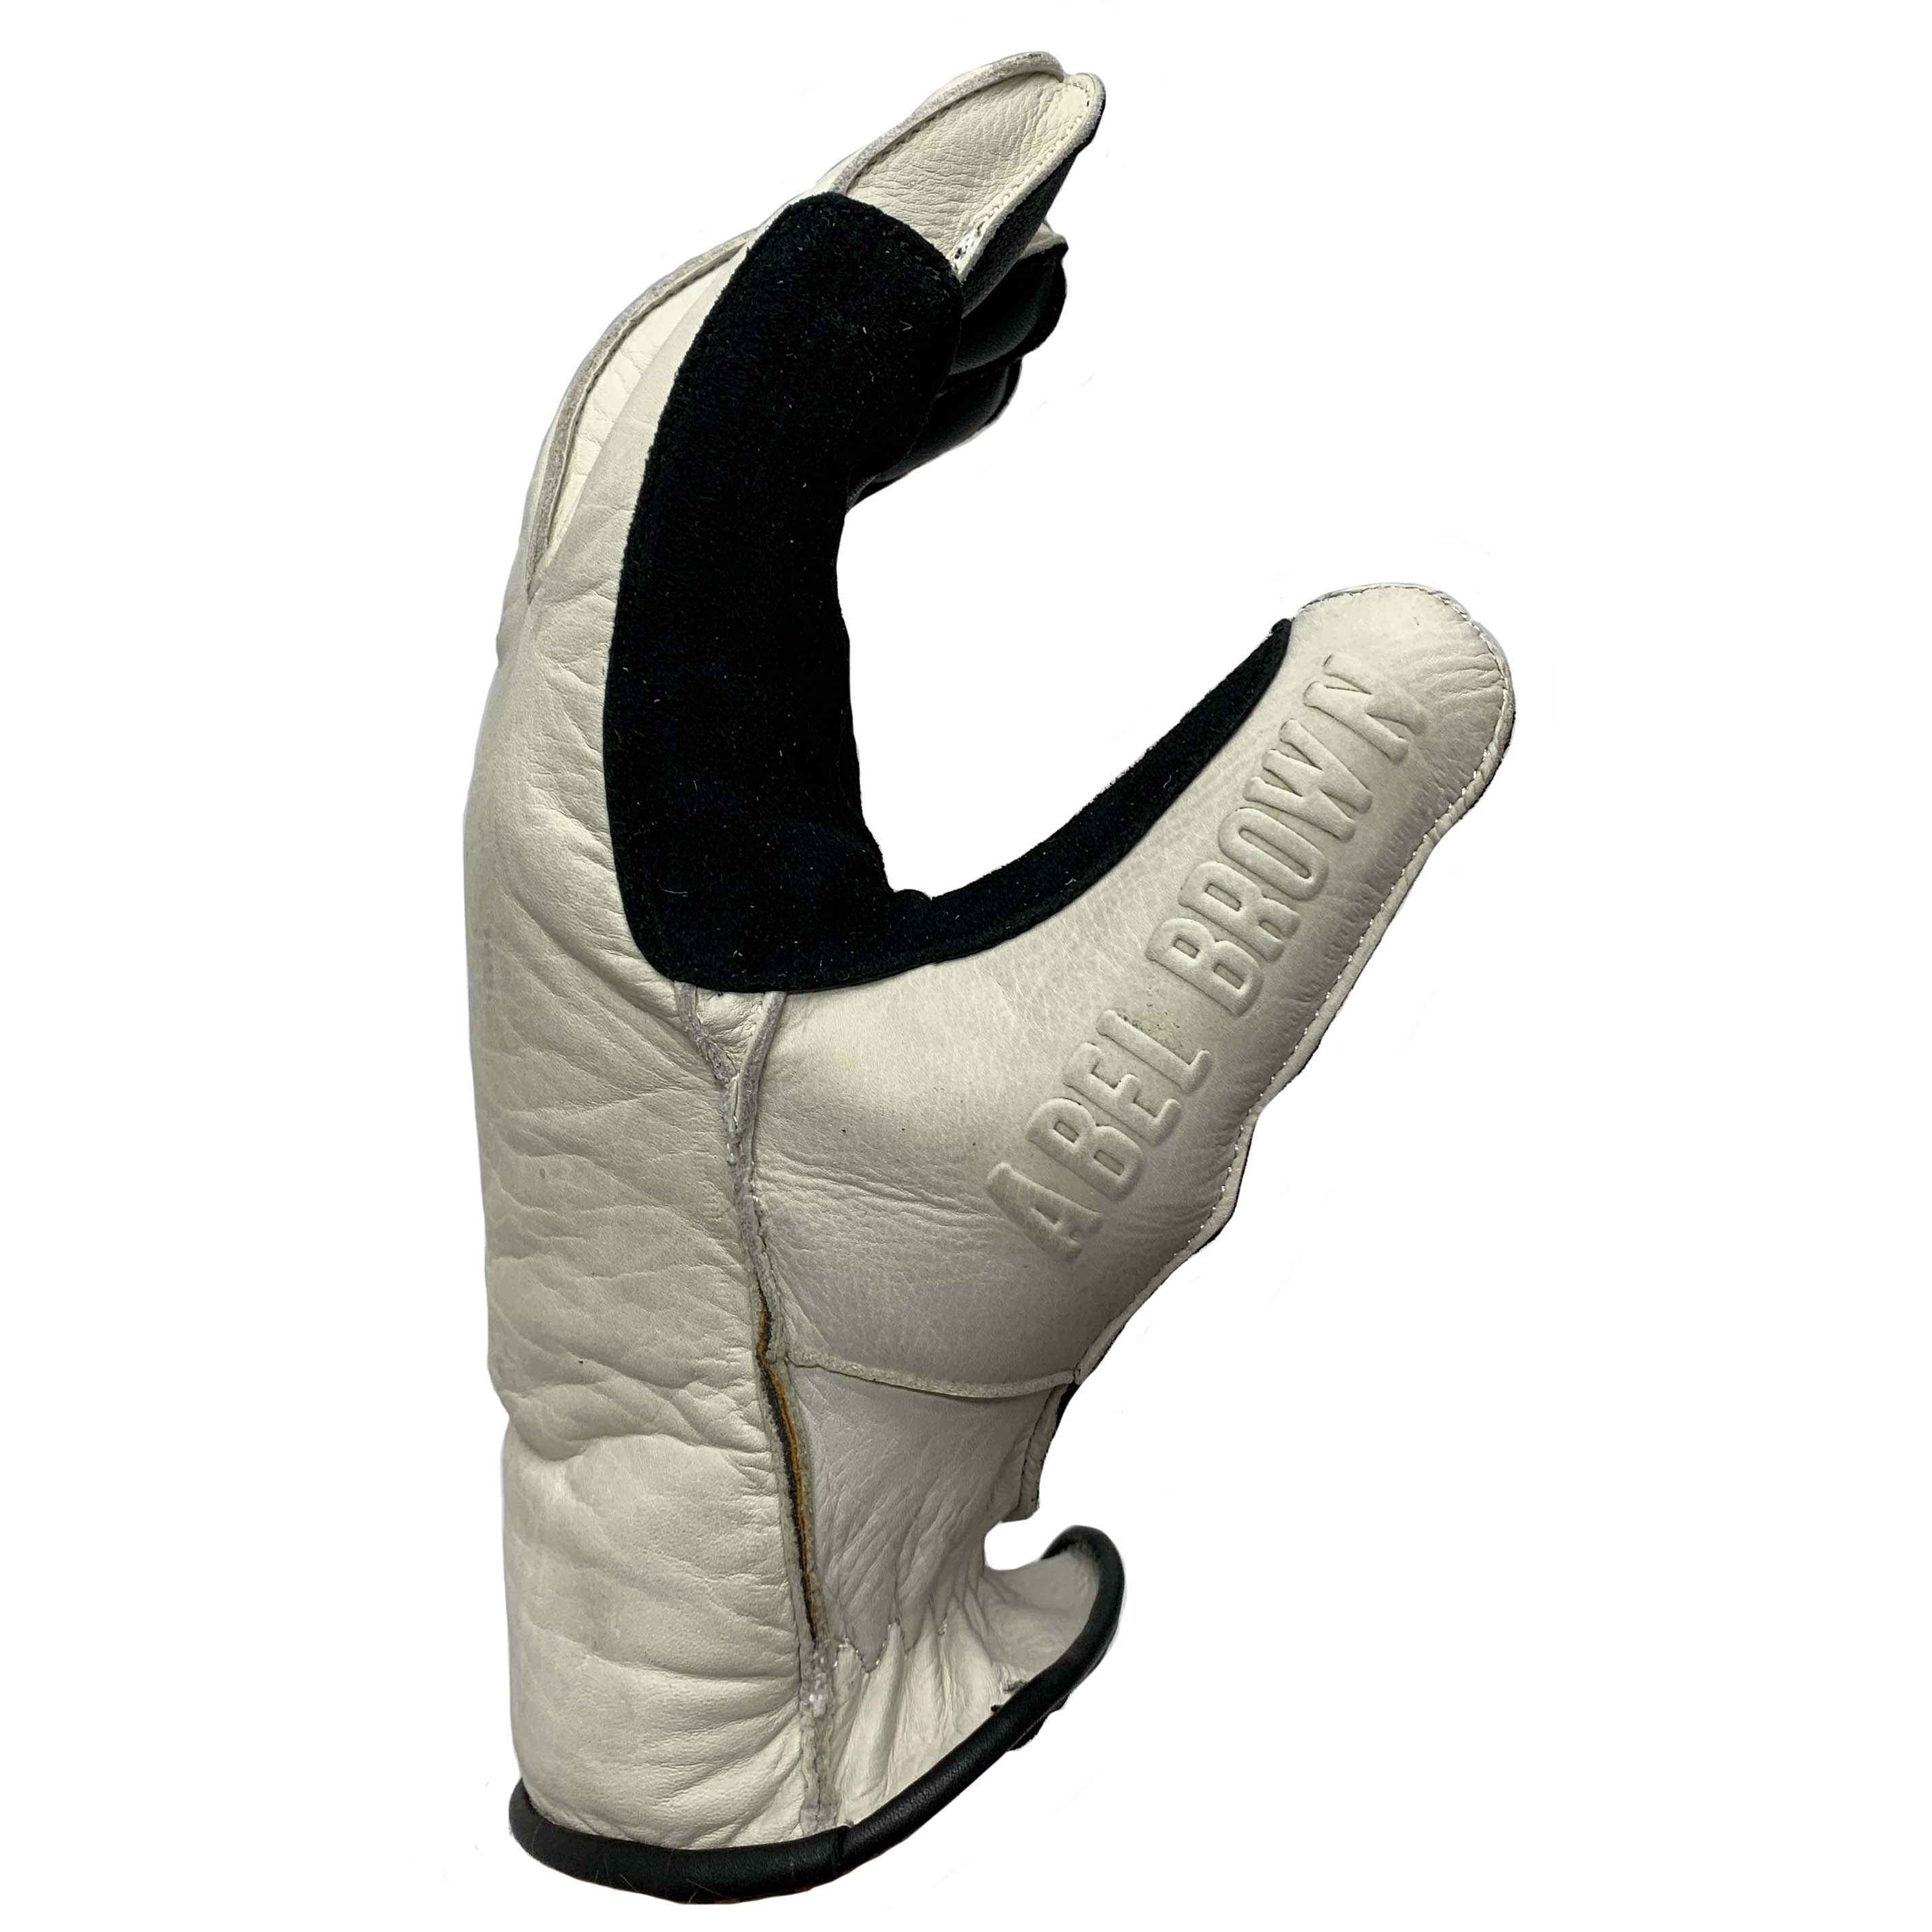 TCB Glove - Limited Release